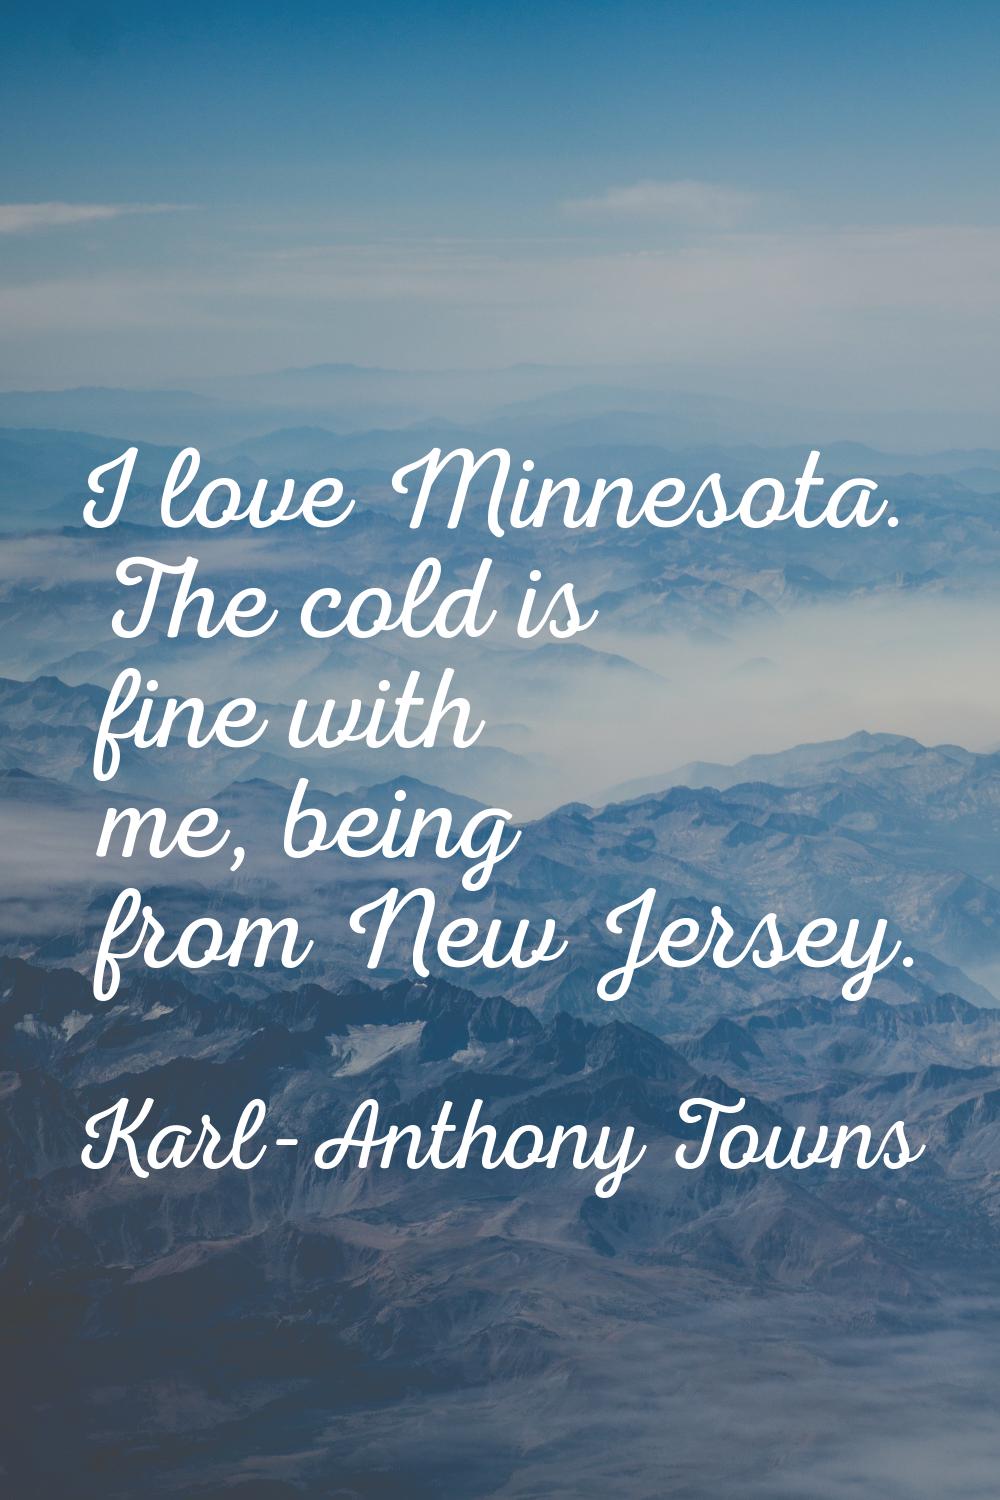 I love Minnesota. The cold is fine with me, being from New Jersey.